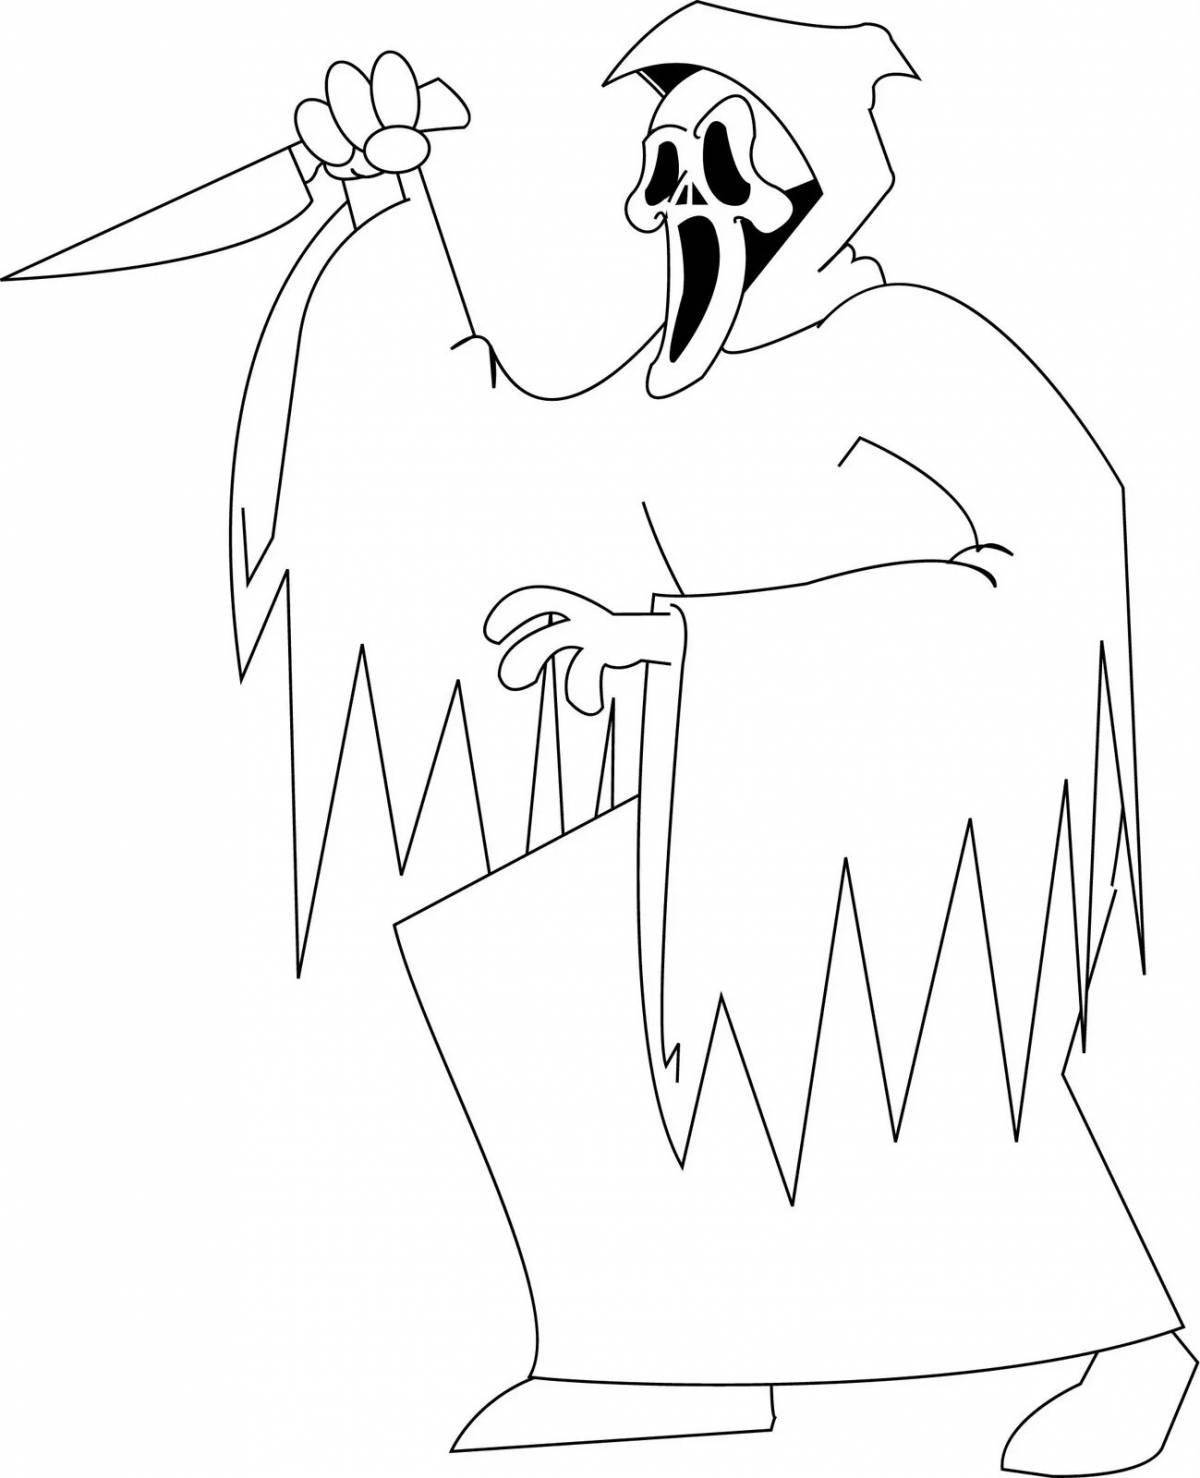 Colorful bitter ogre coloring page